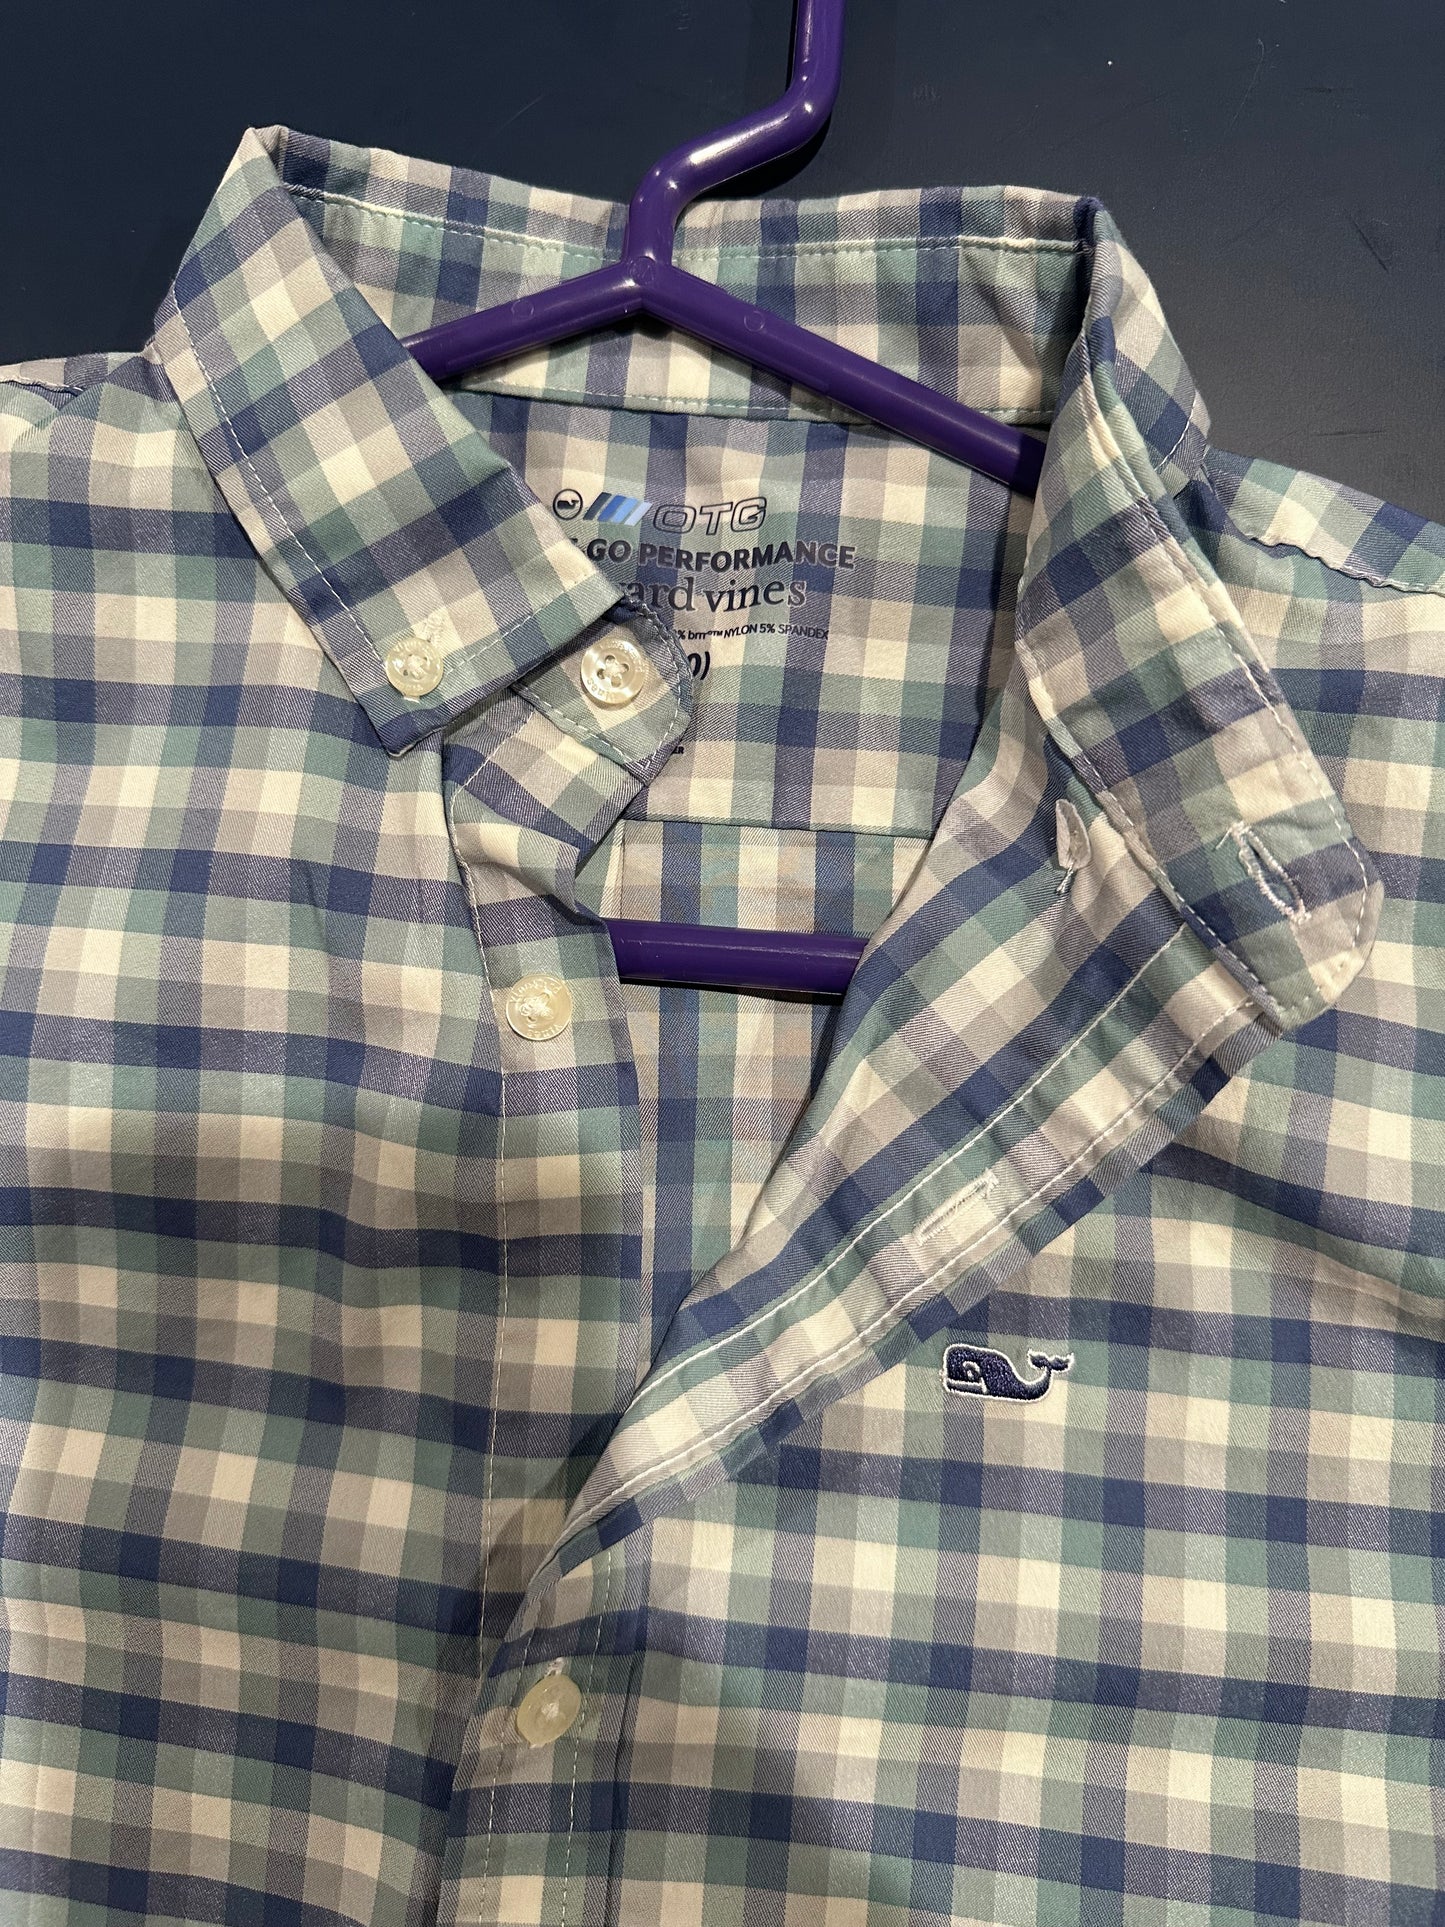 Vineyard Vines Boys Size Small 8-10 Gingham Button Down Shirt Performance, perfect condition